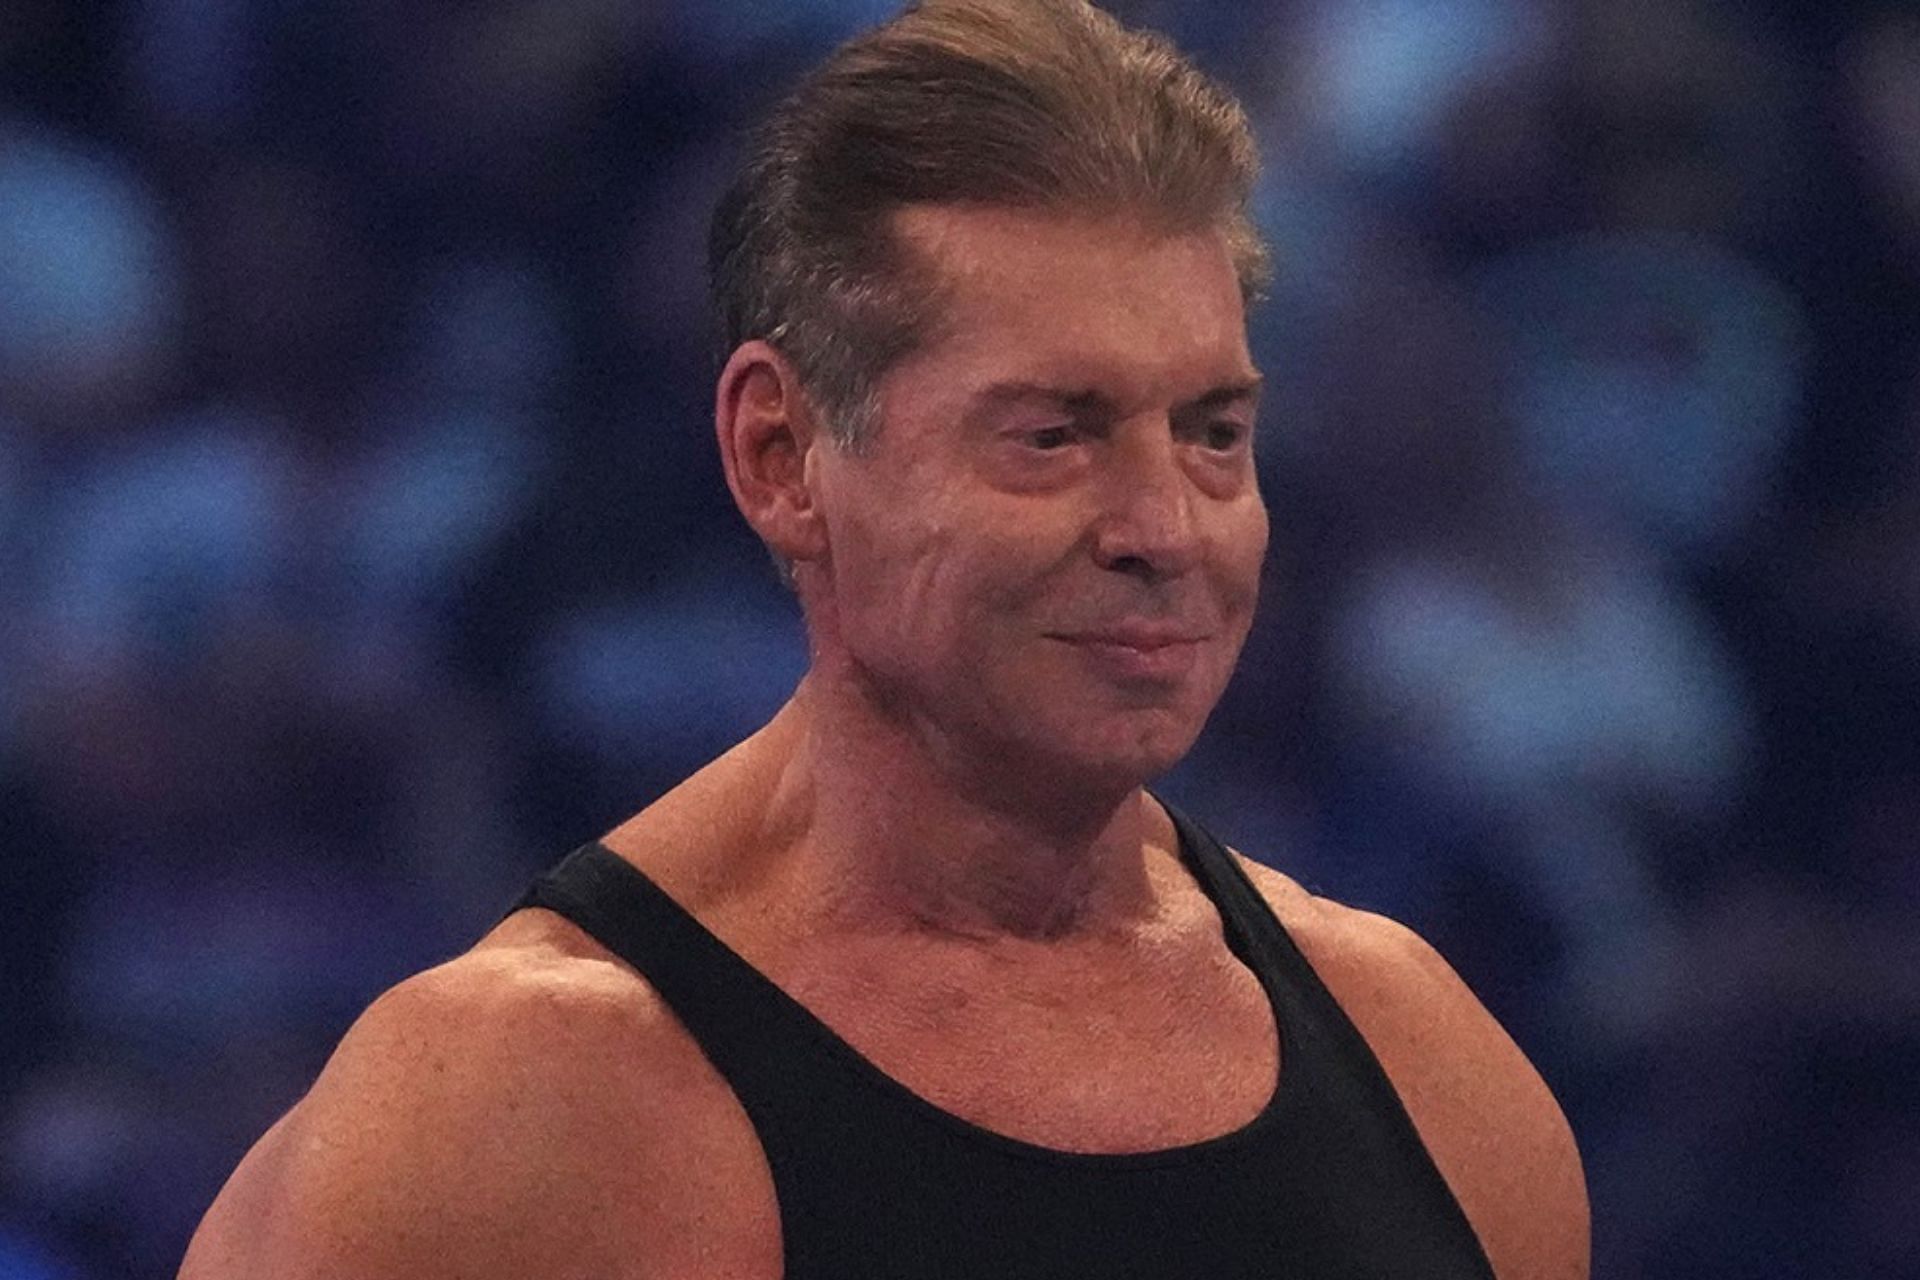 Vince McMahon has played both a behind-the-scenes and an in-ring role in WWE